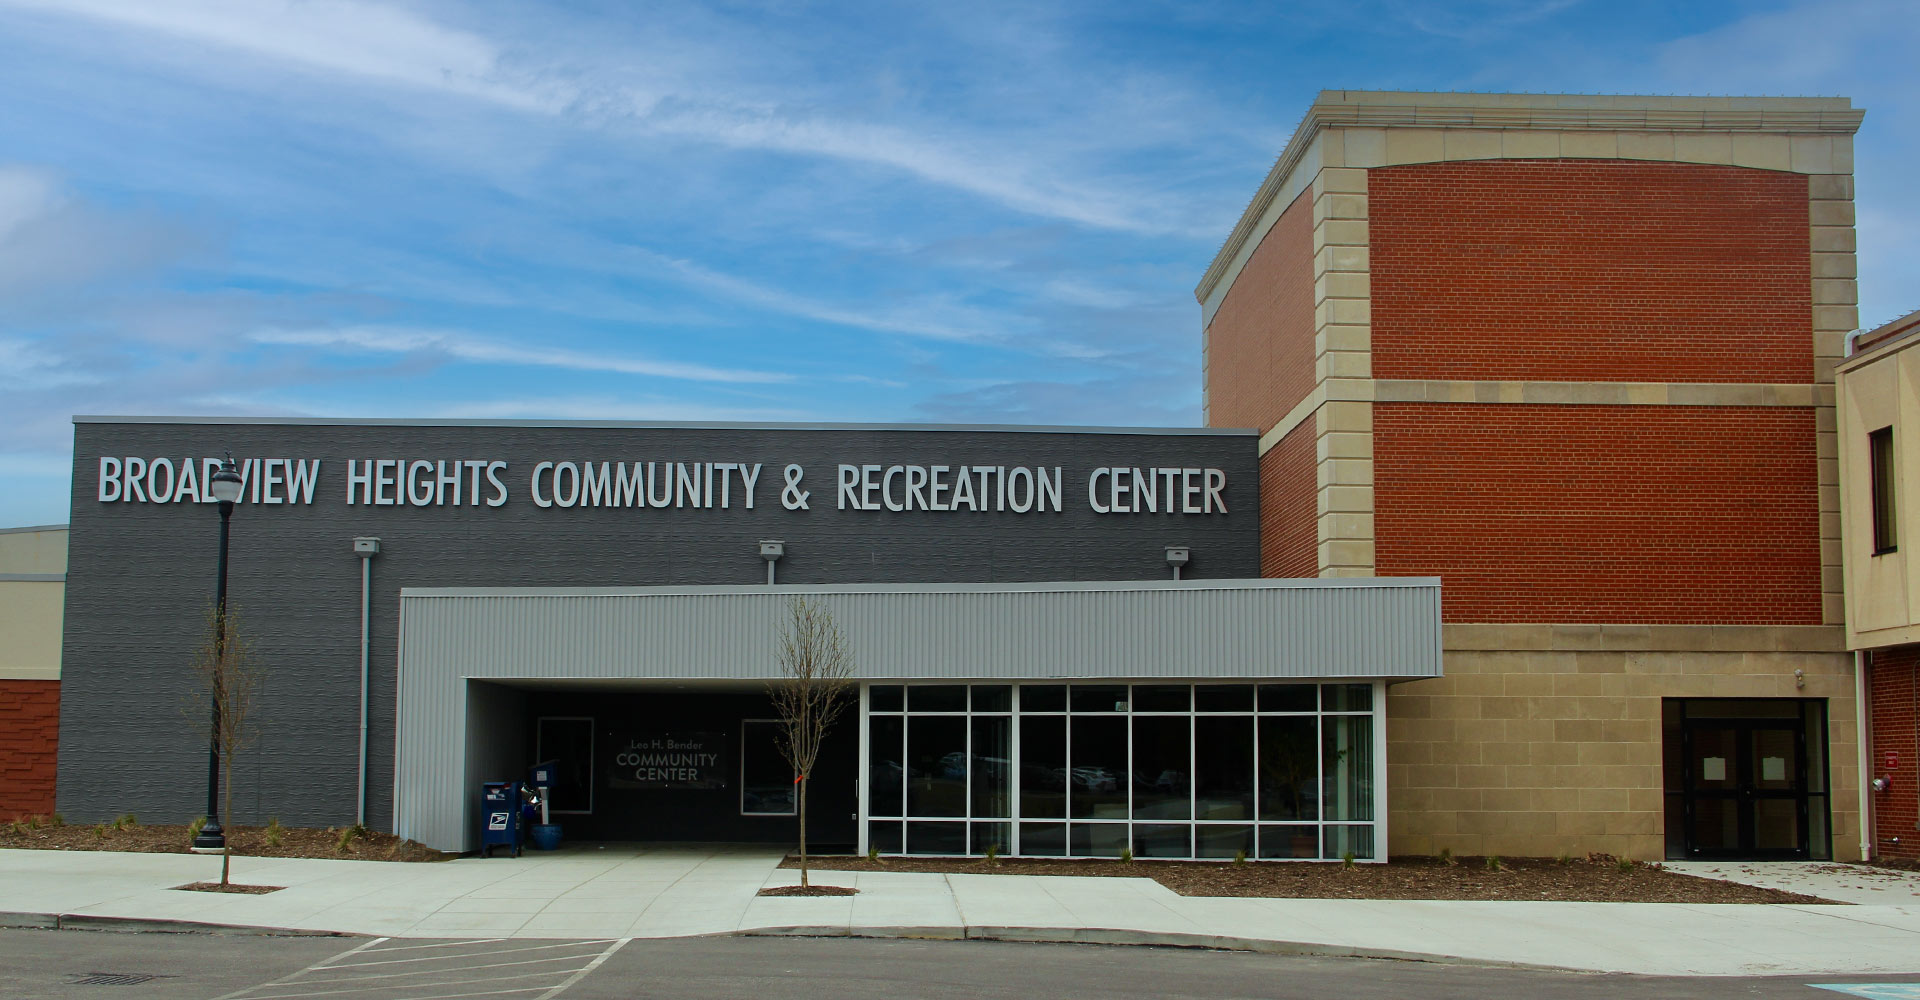 Broadview Heights Community & Recreation Center